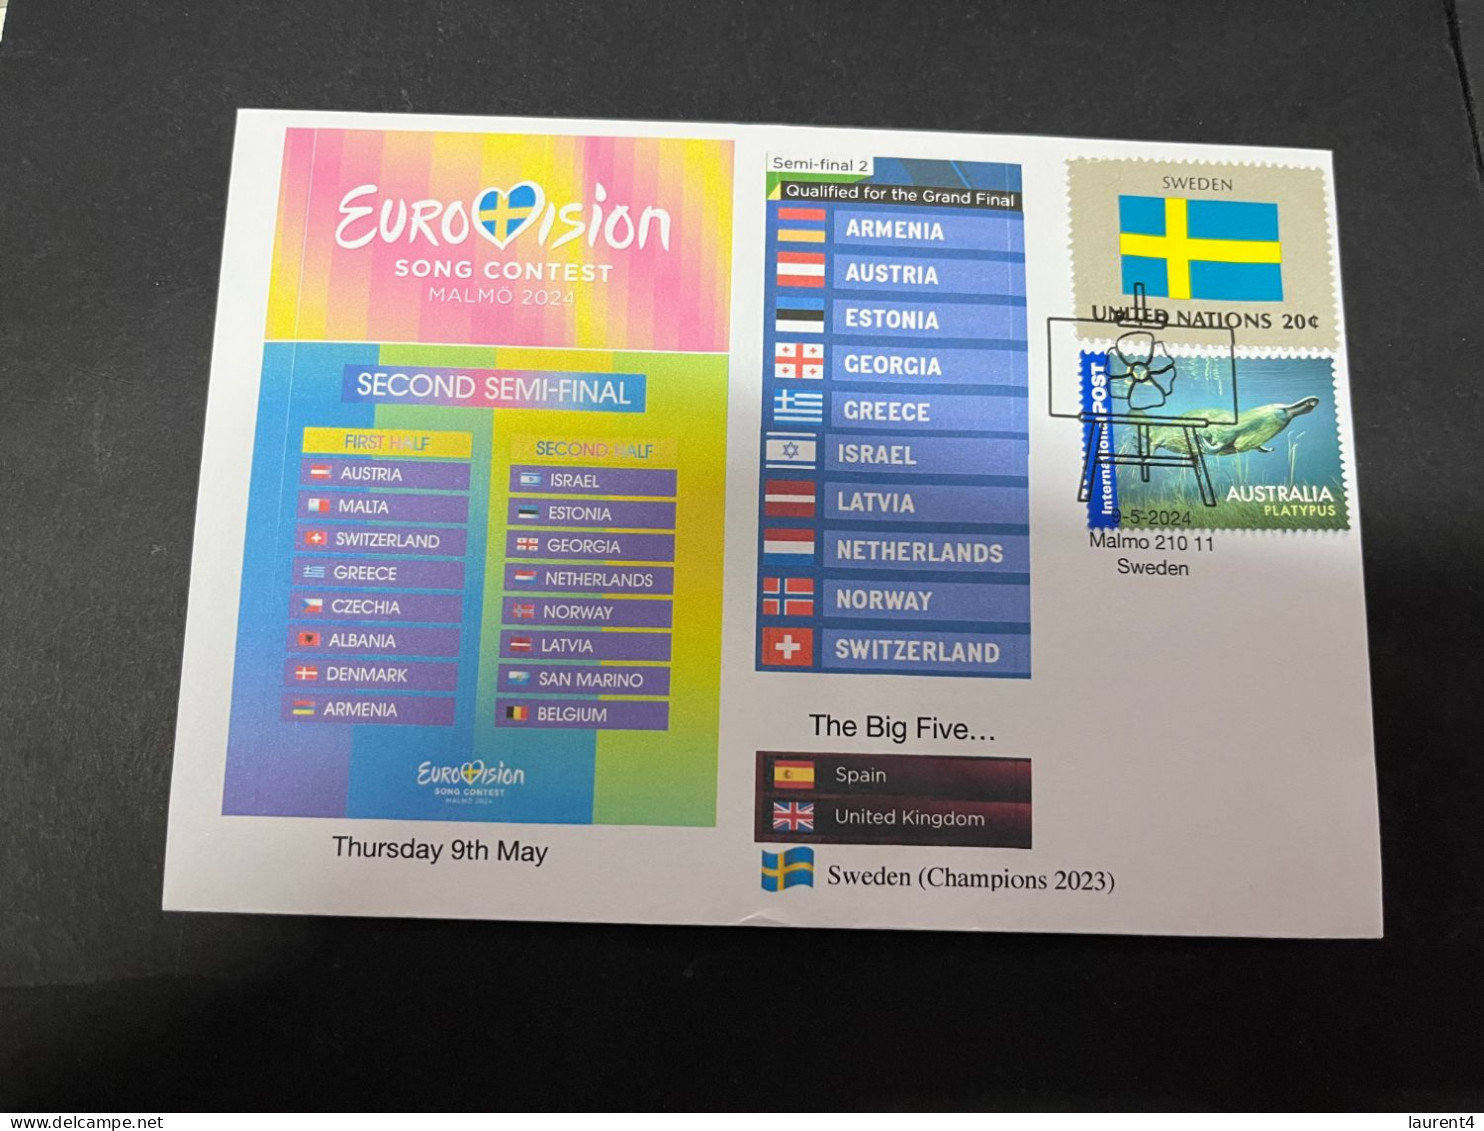 10-5-2024 (4 Z 37) Eurovision Song Contest 2024 - Semi-Final 2 On 9-5-2024 (with Sweden Flag Stamp) - Music